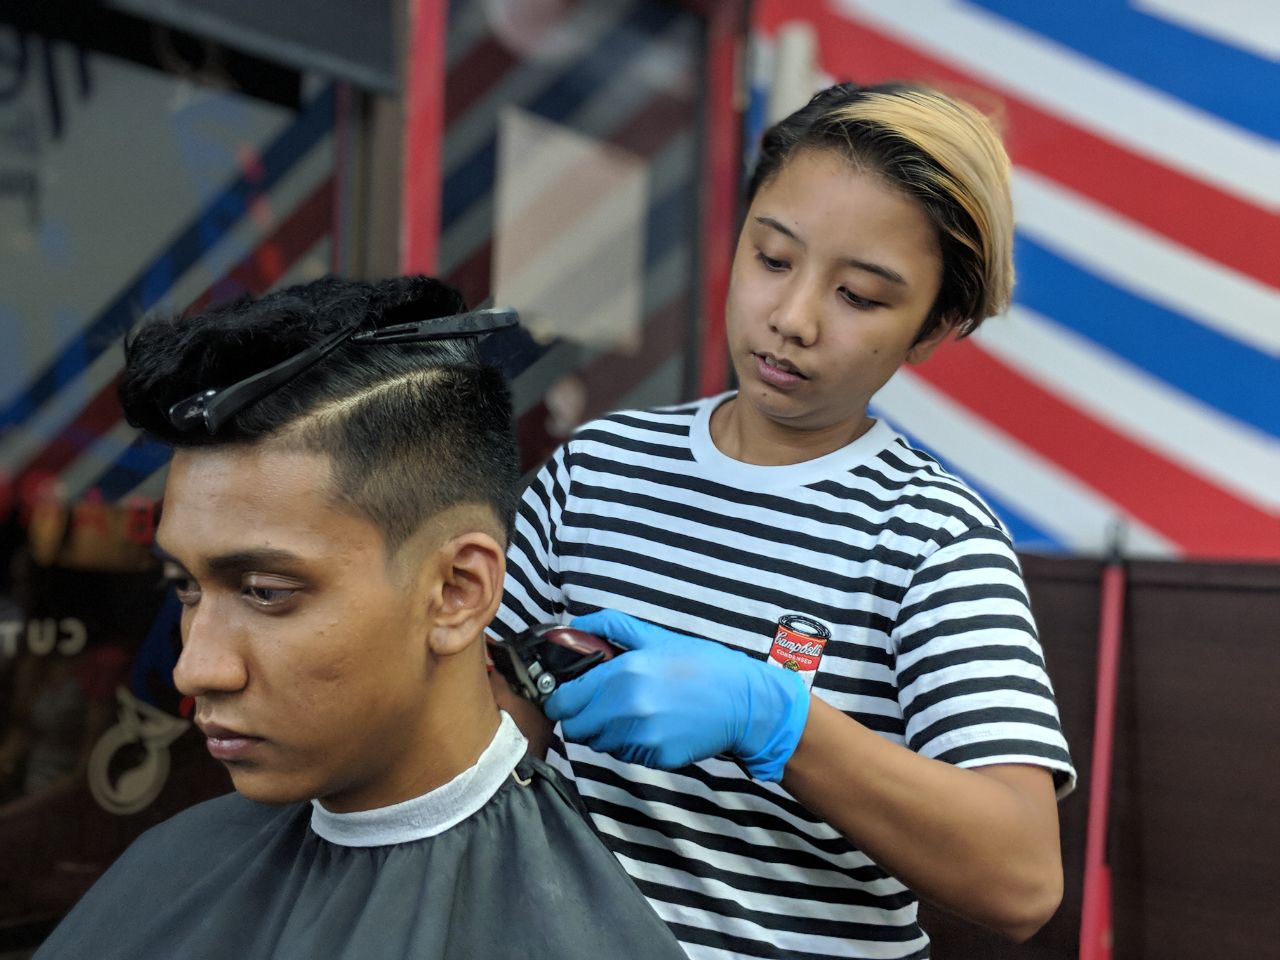 Sporean Barber 26 Doesnt Want Customers To Know Shes The Boss Of